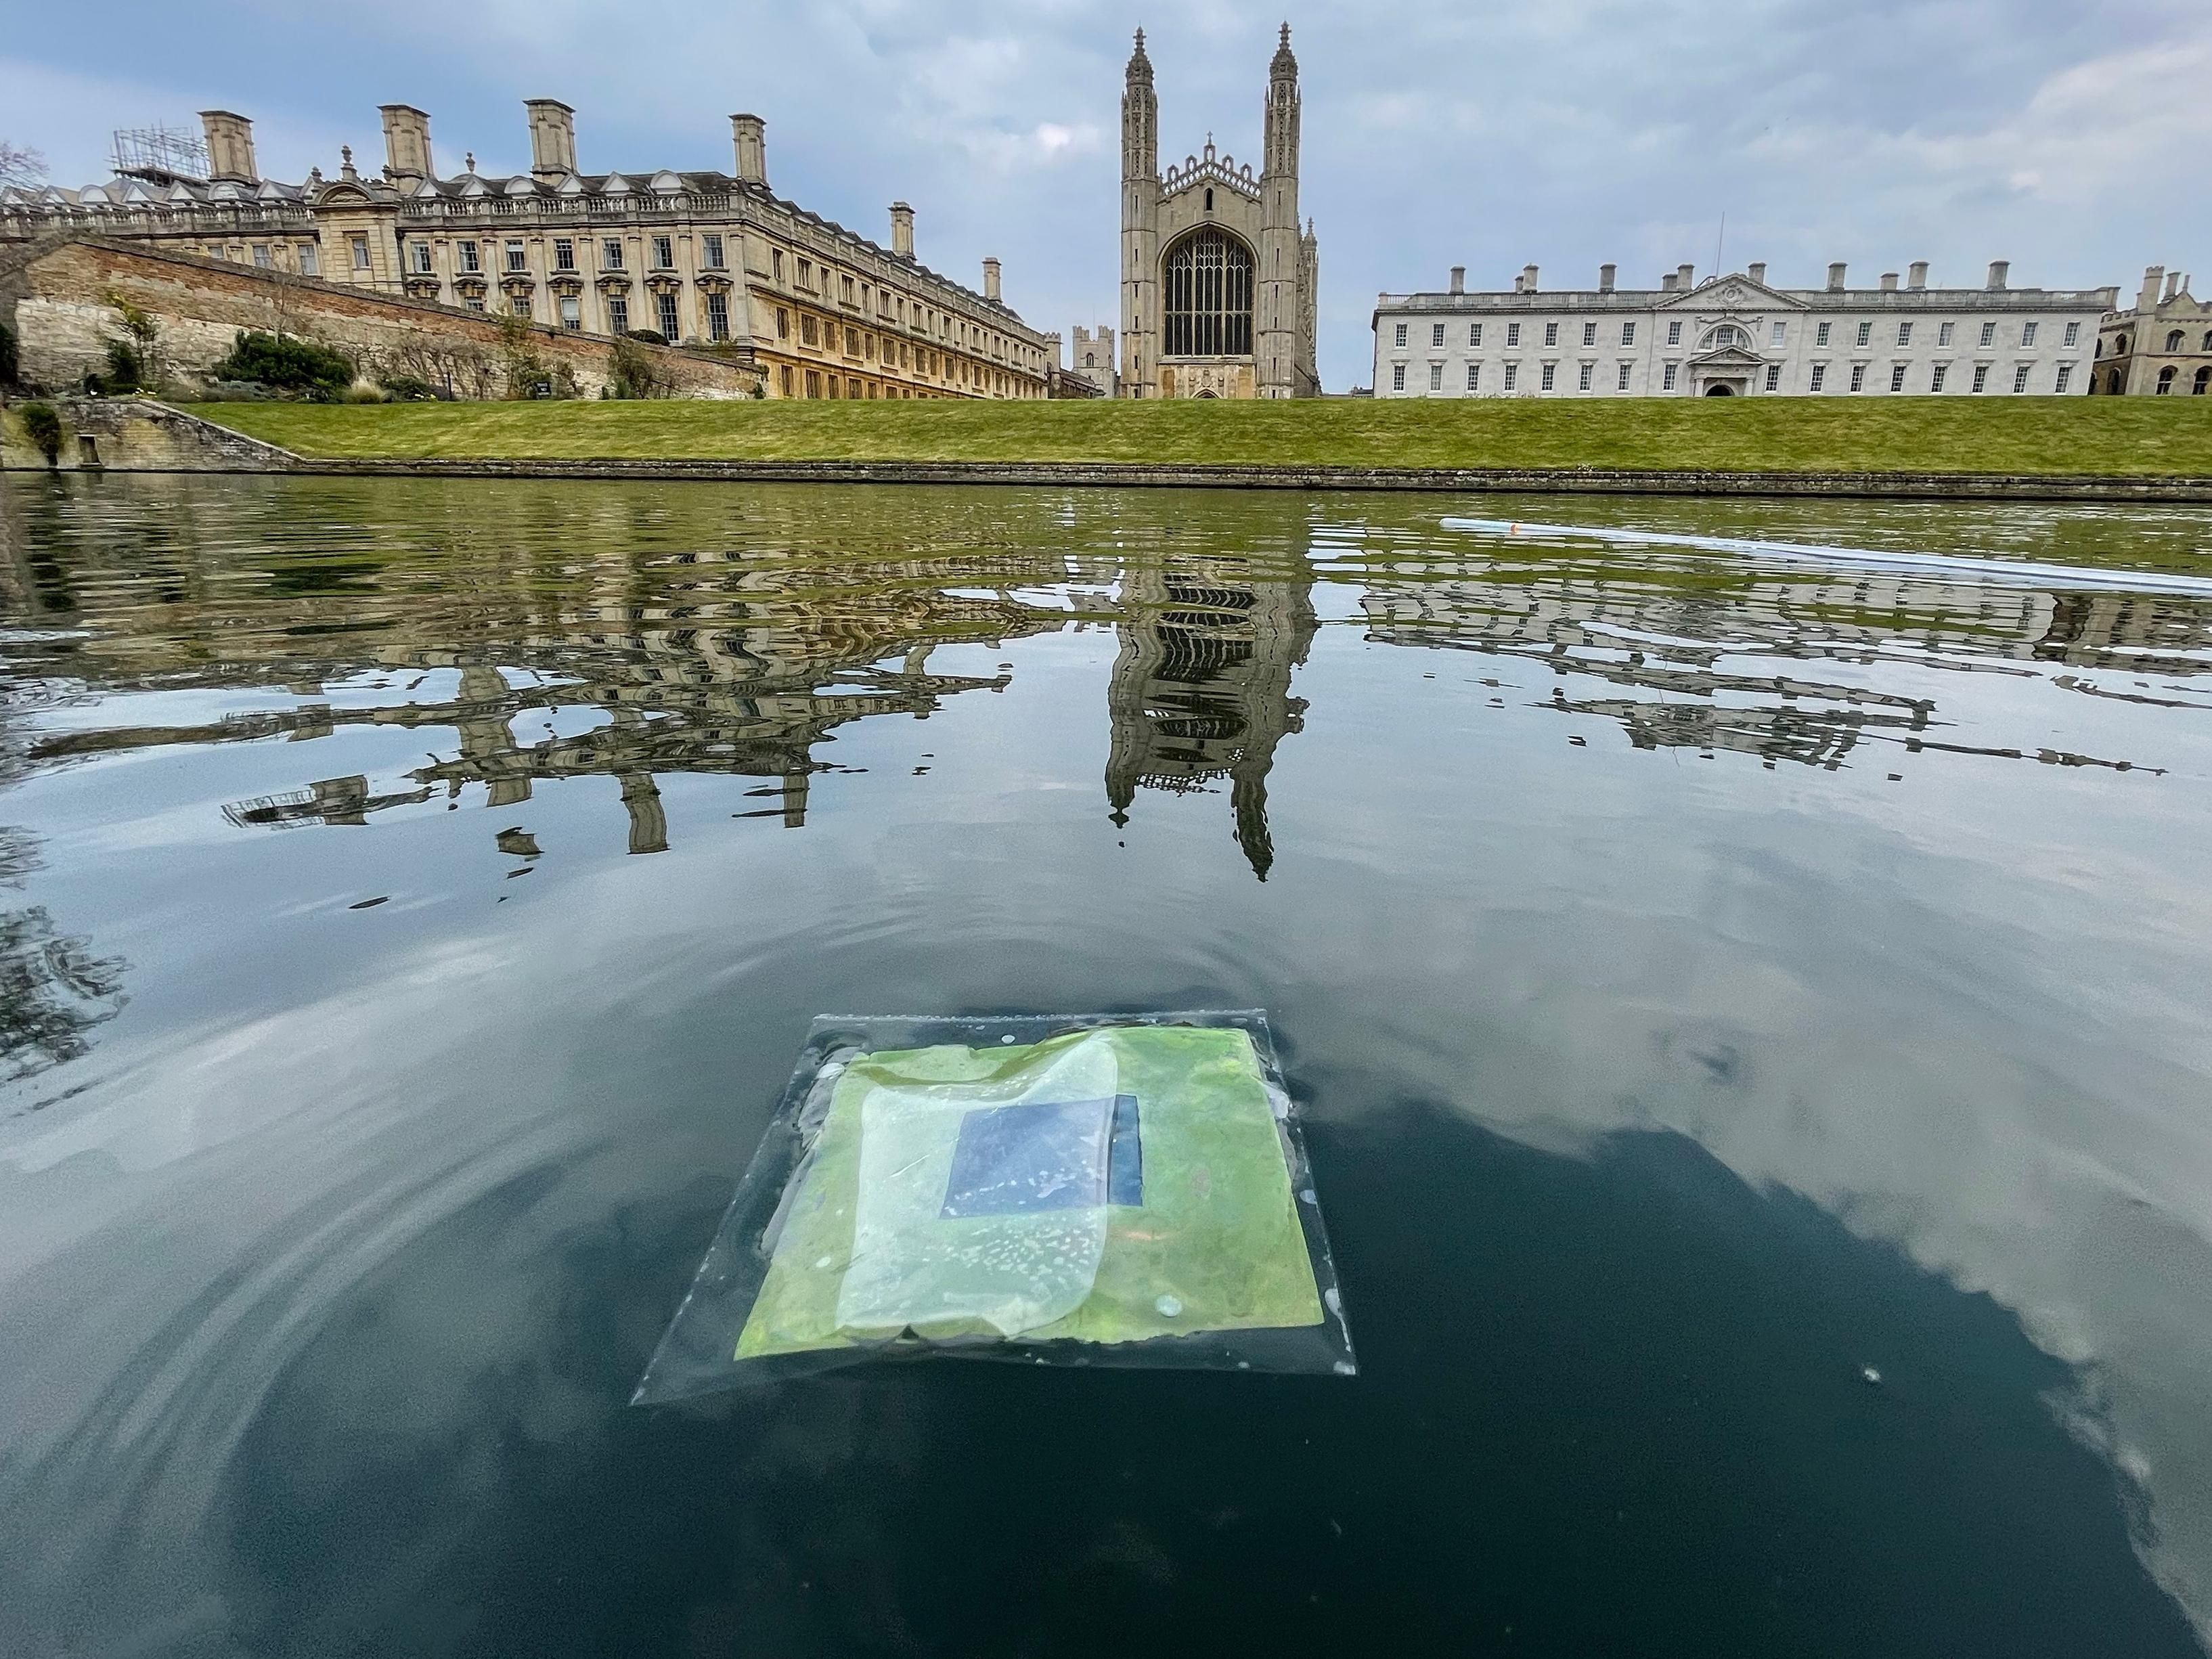 A green square floats on the water in front of buildings and blue sky.